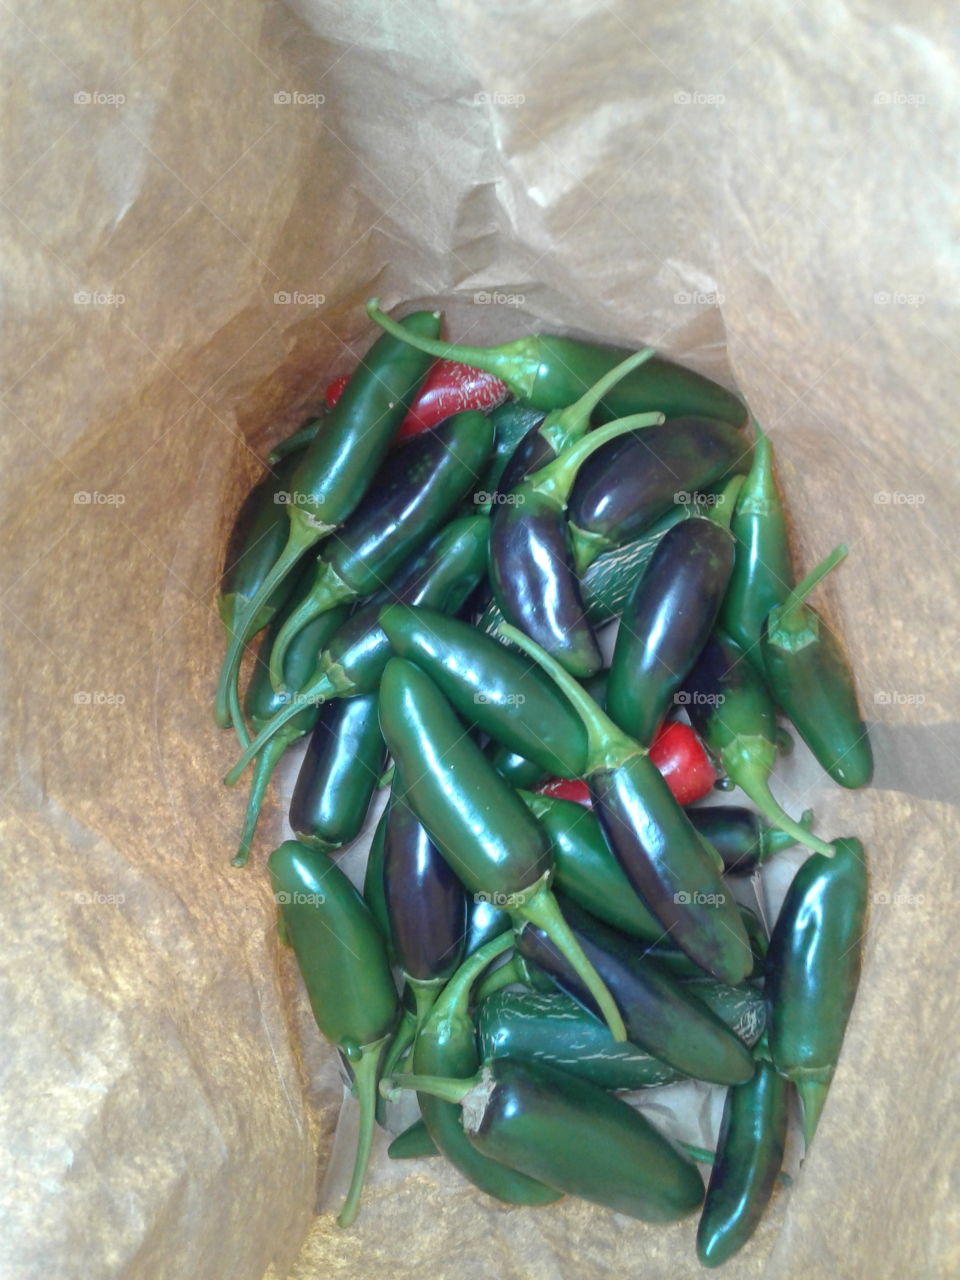 jalapenos from the garden